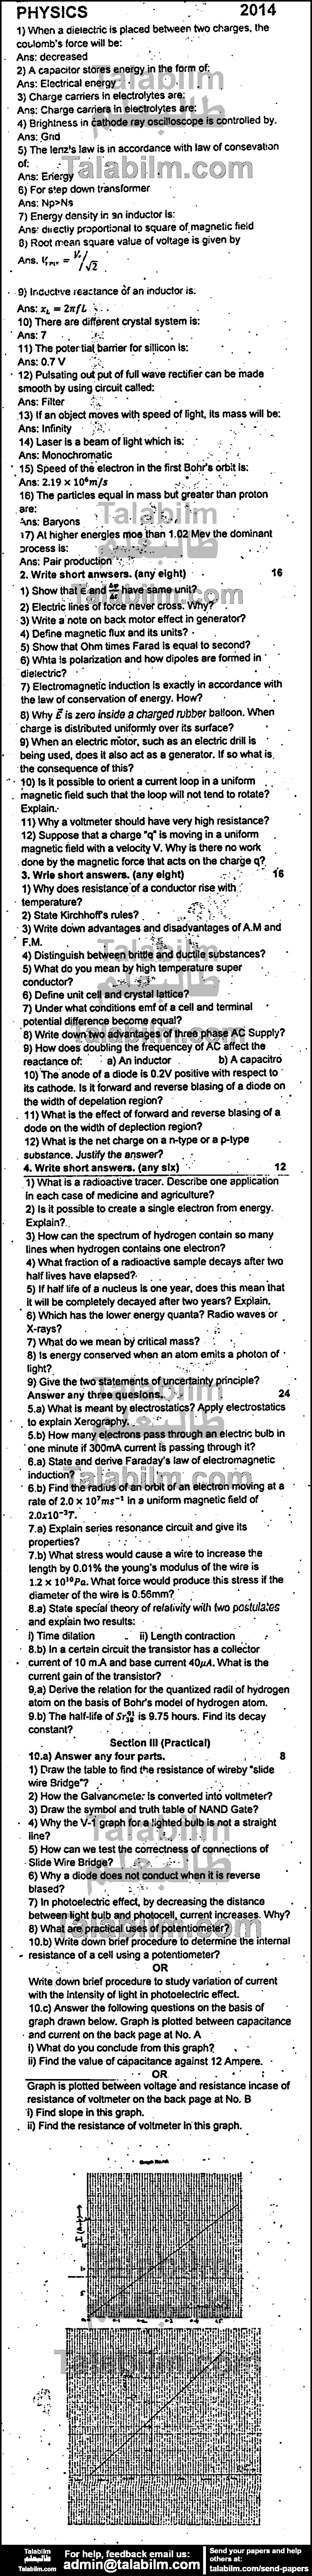 Physics 0 past paper for Group-I 2014